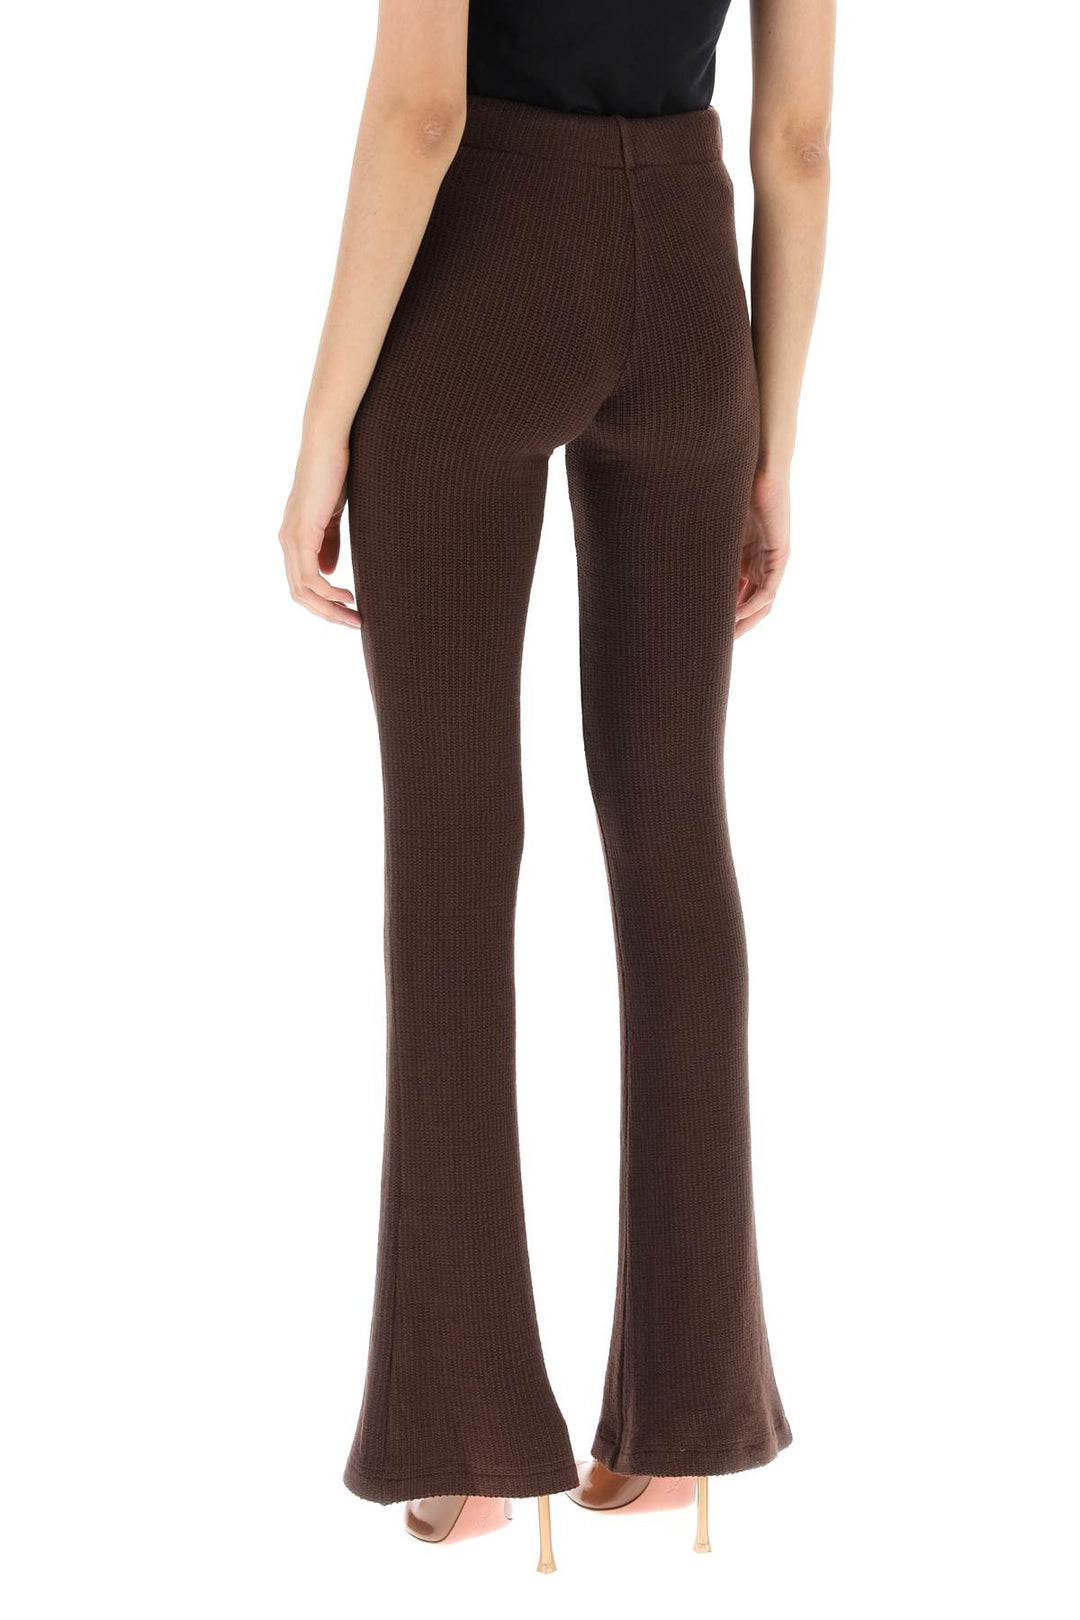 Siedres 'flo' knitted pants-2